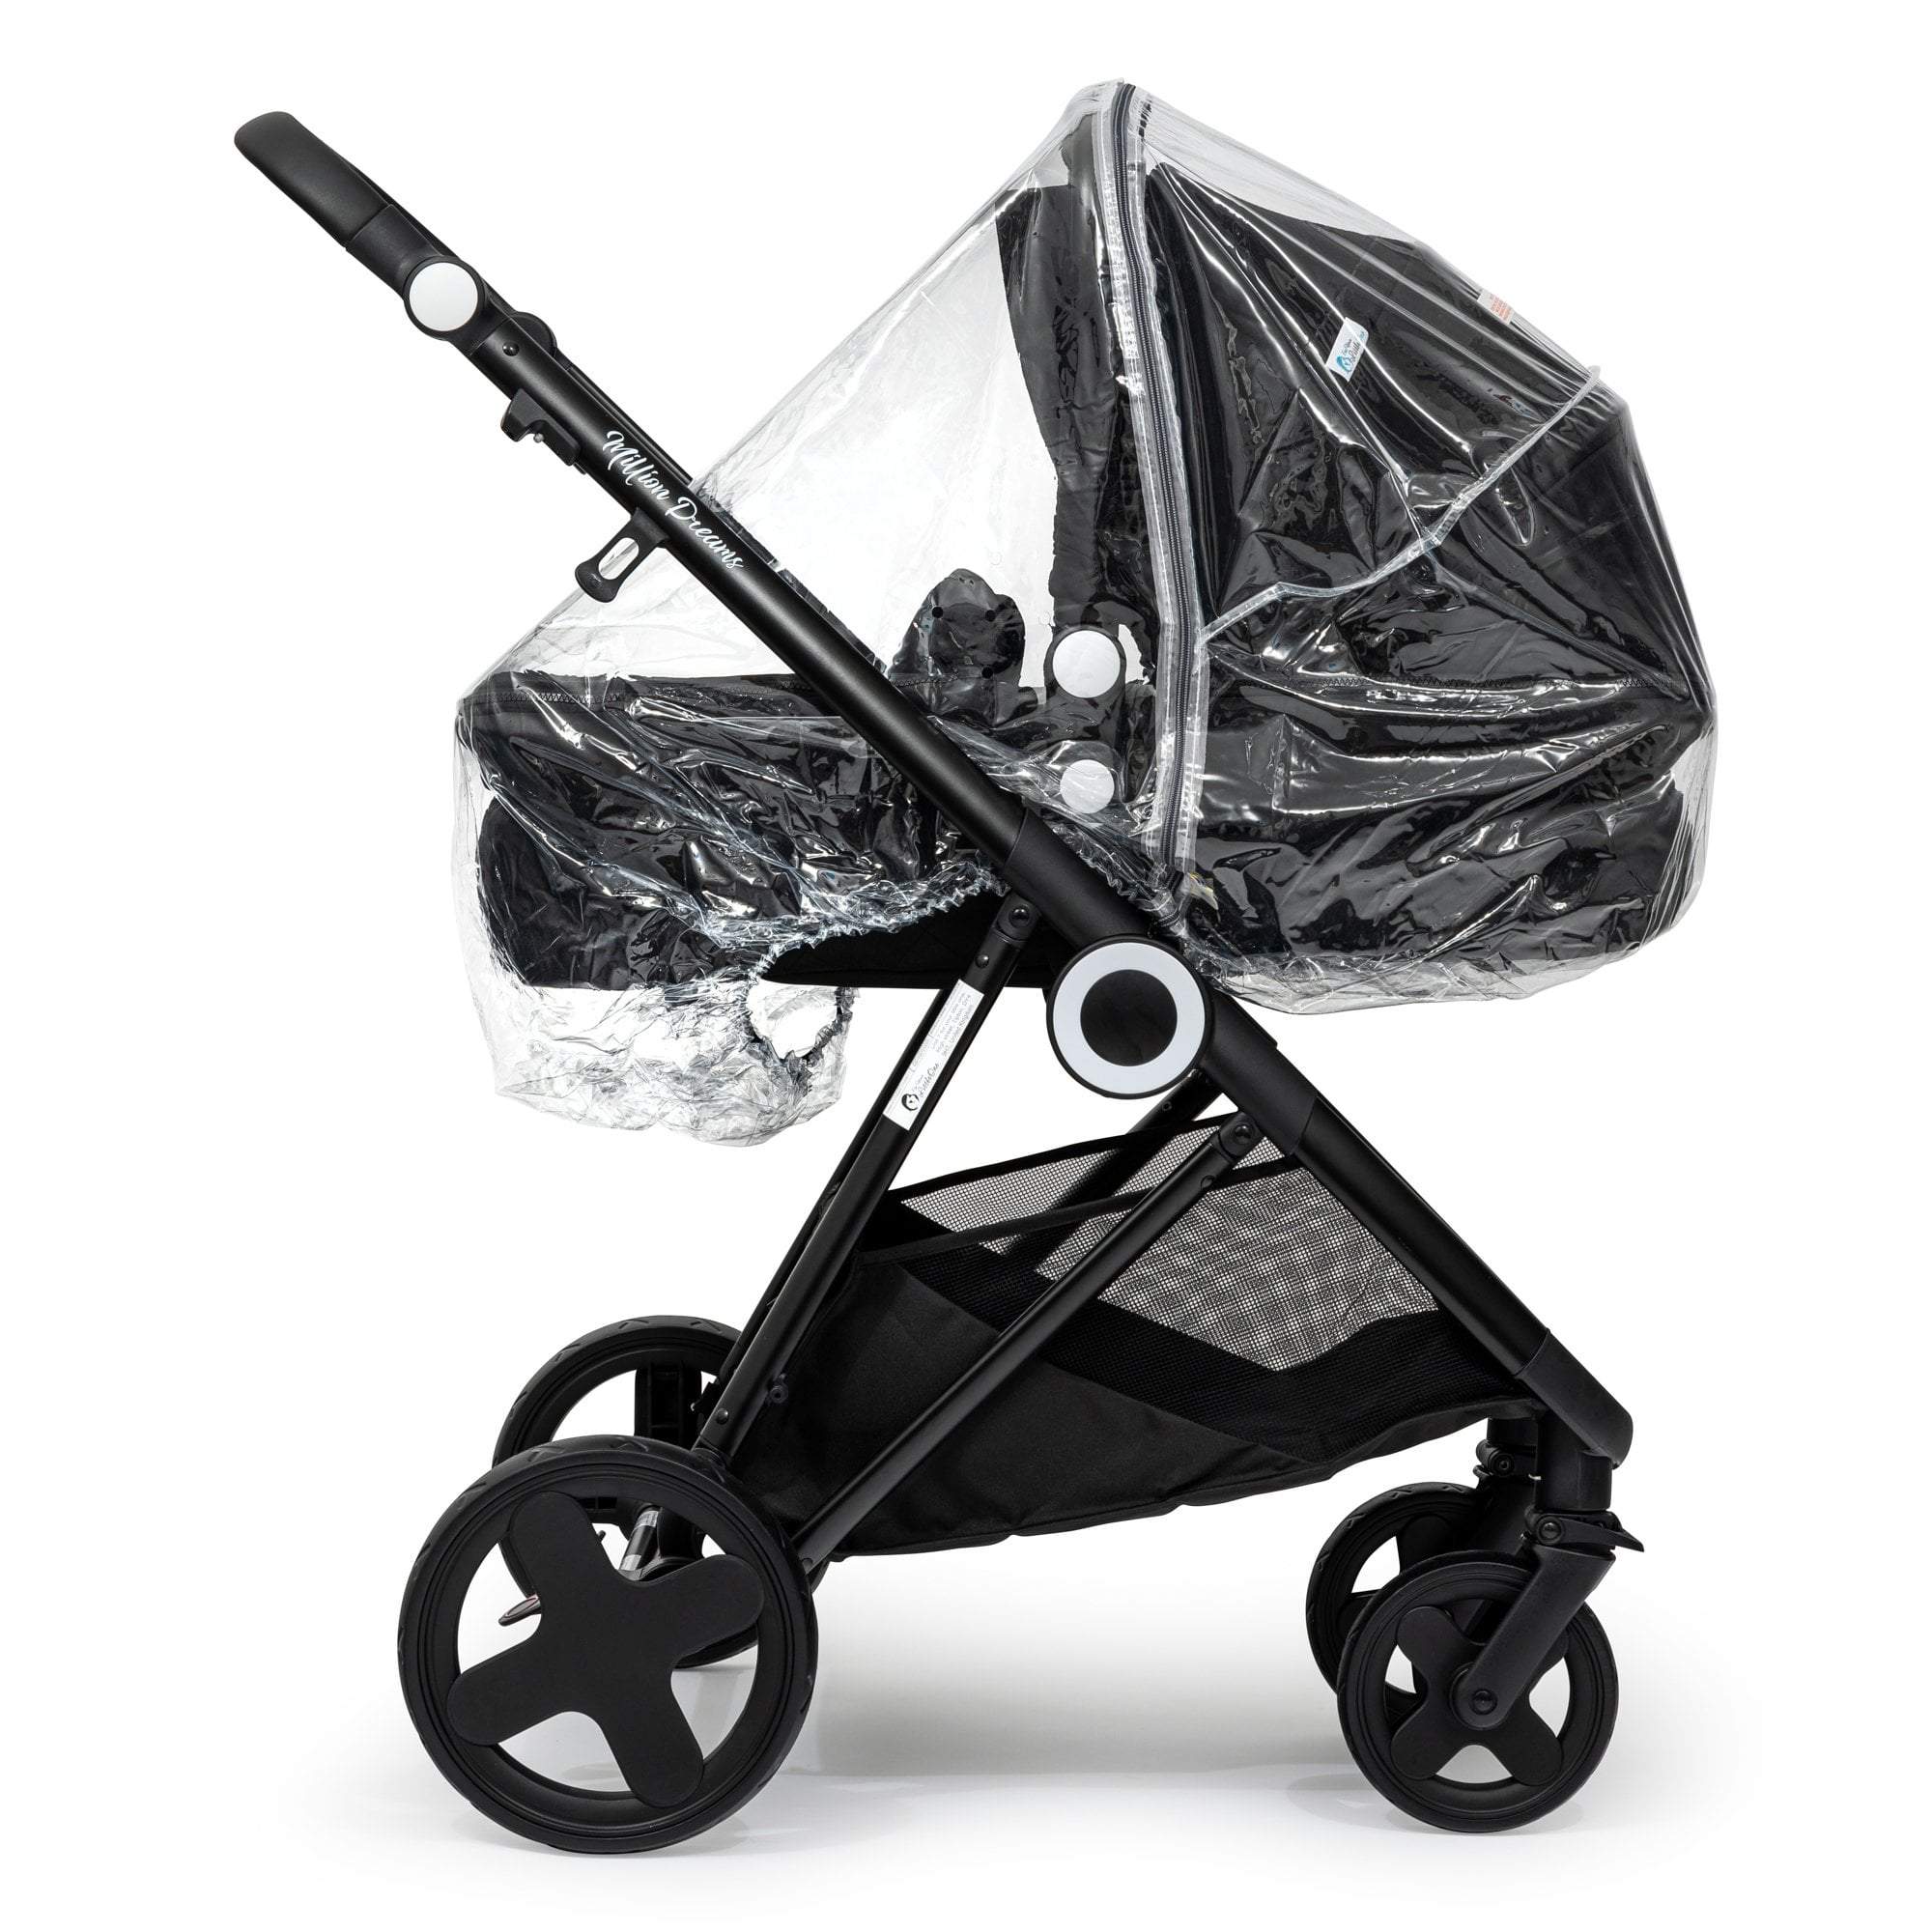 Carrycot Raincover Compatible With Baby Trend - Fits All Models - For Your Little One